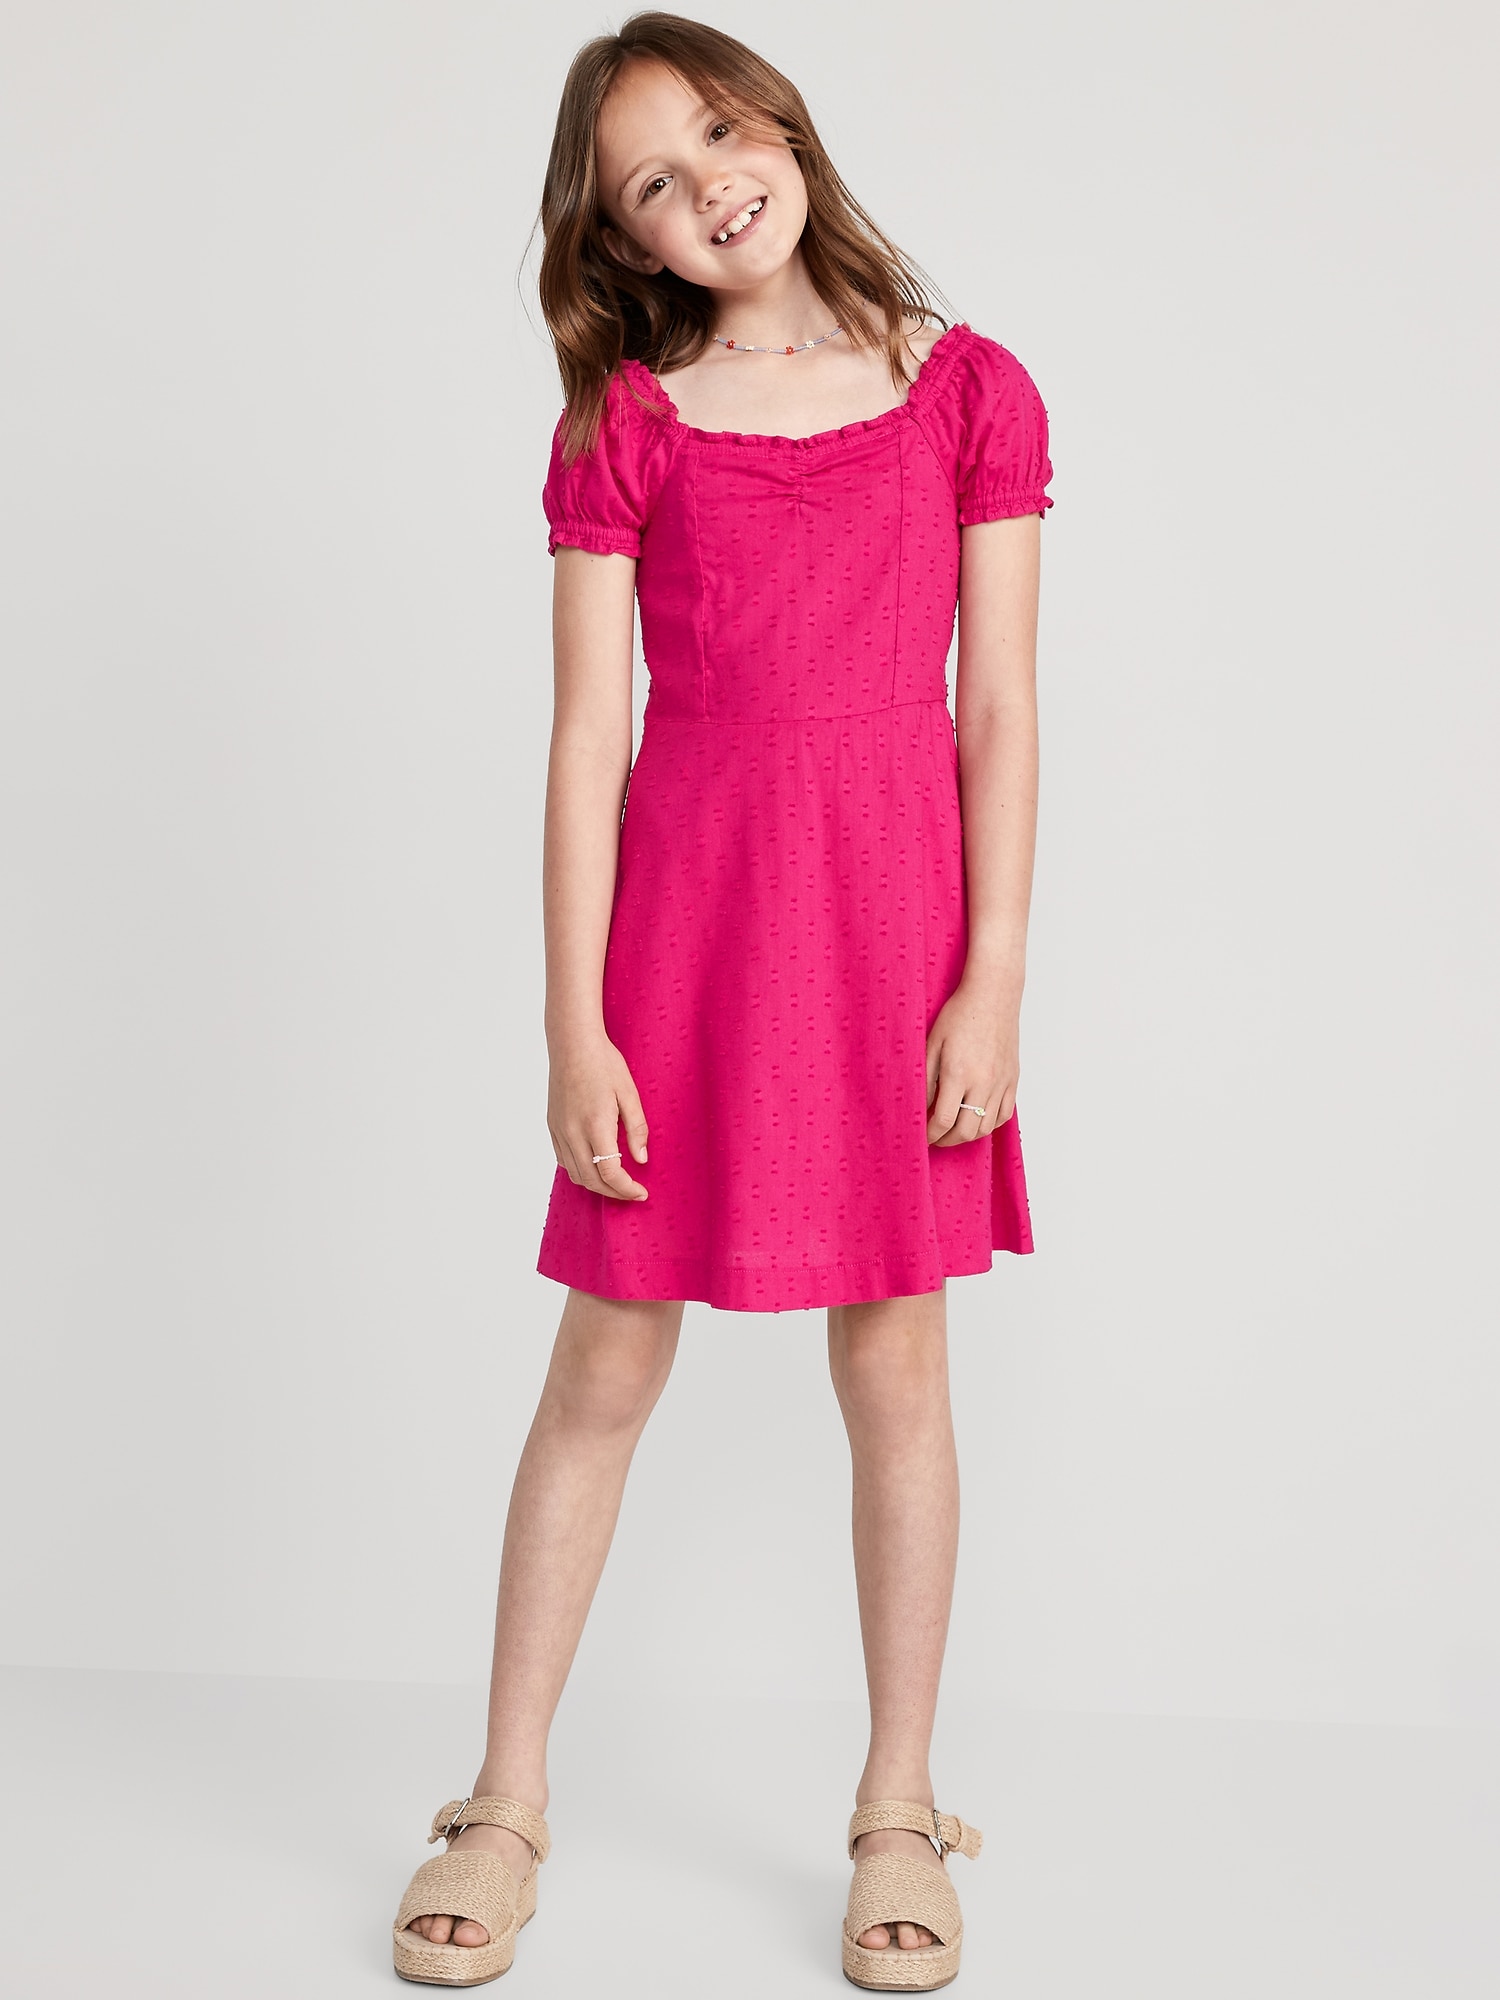 Puff-Sleeve Clip-Dot Fit & Flare Dress for Girls